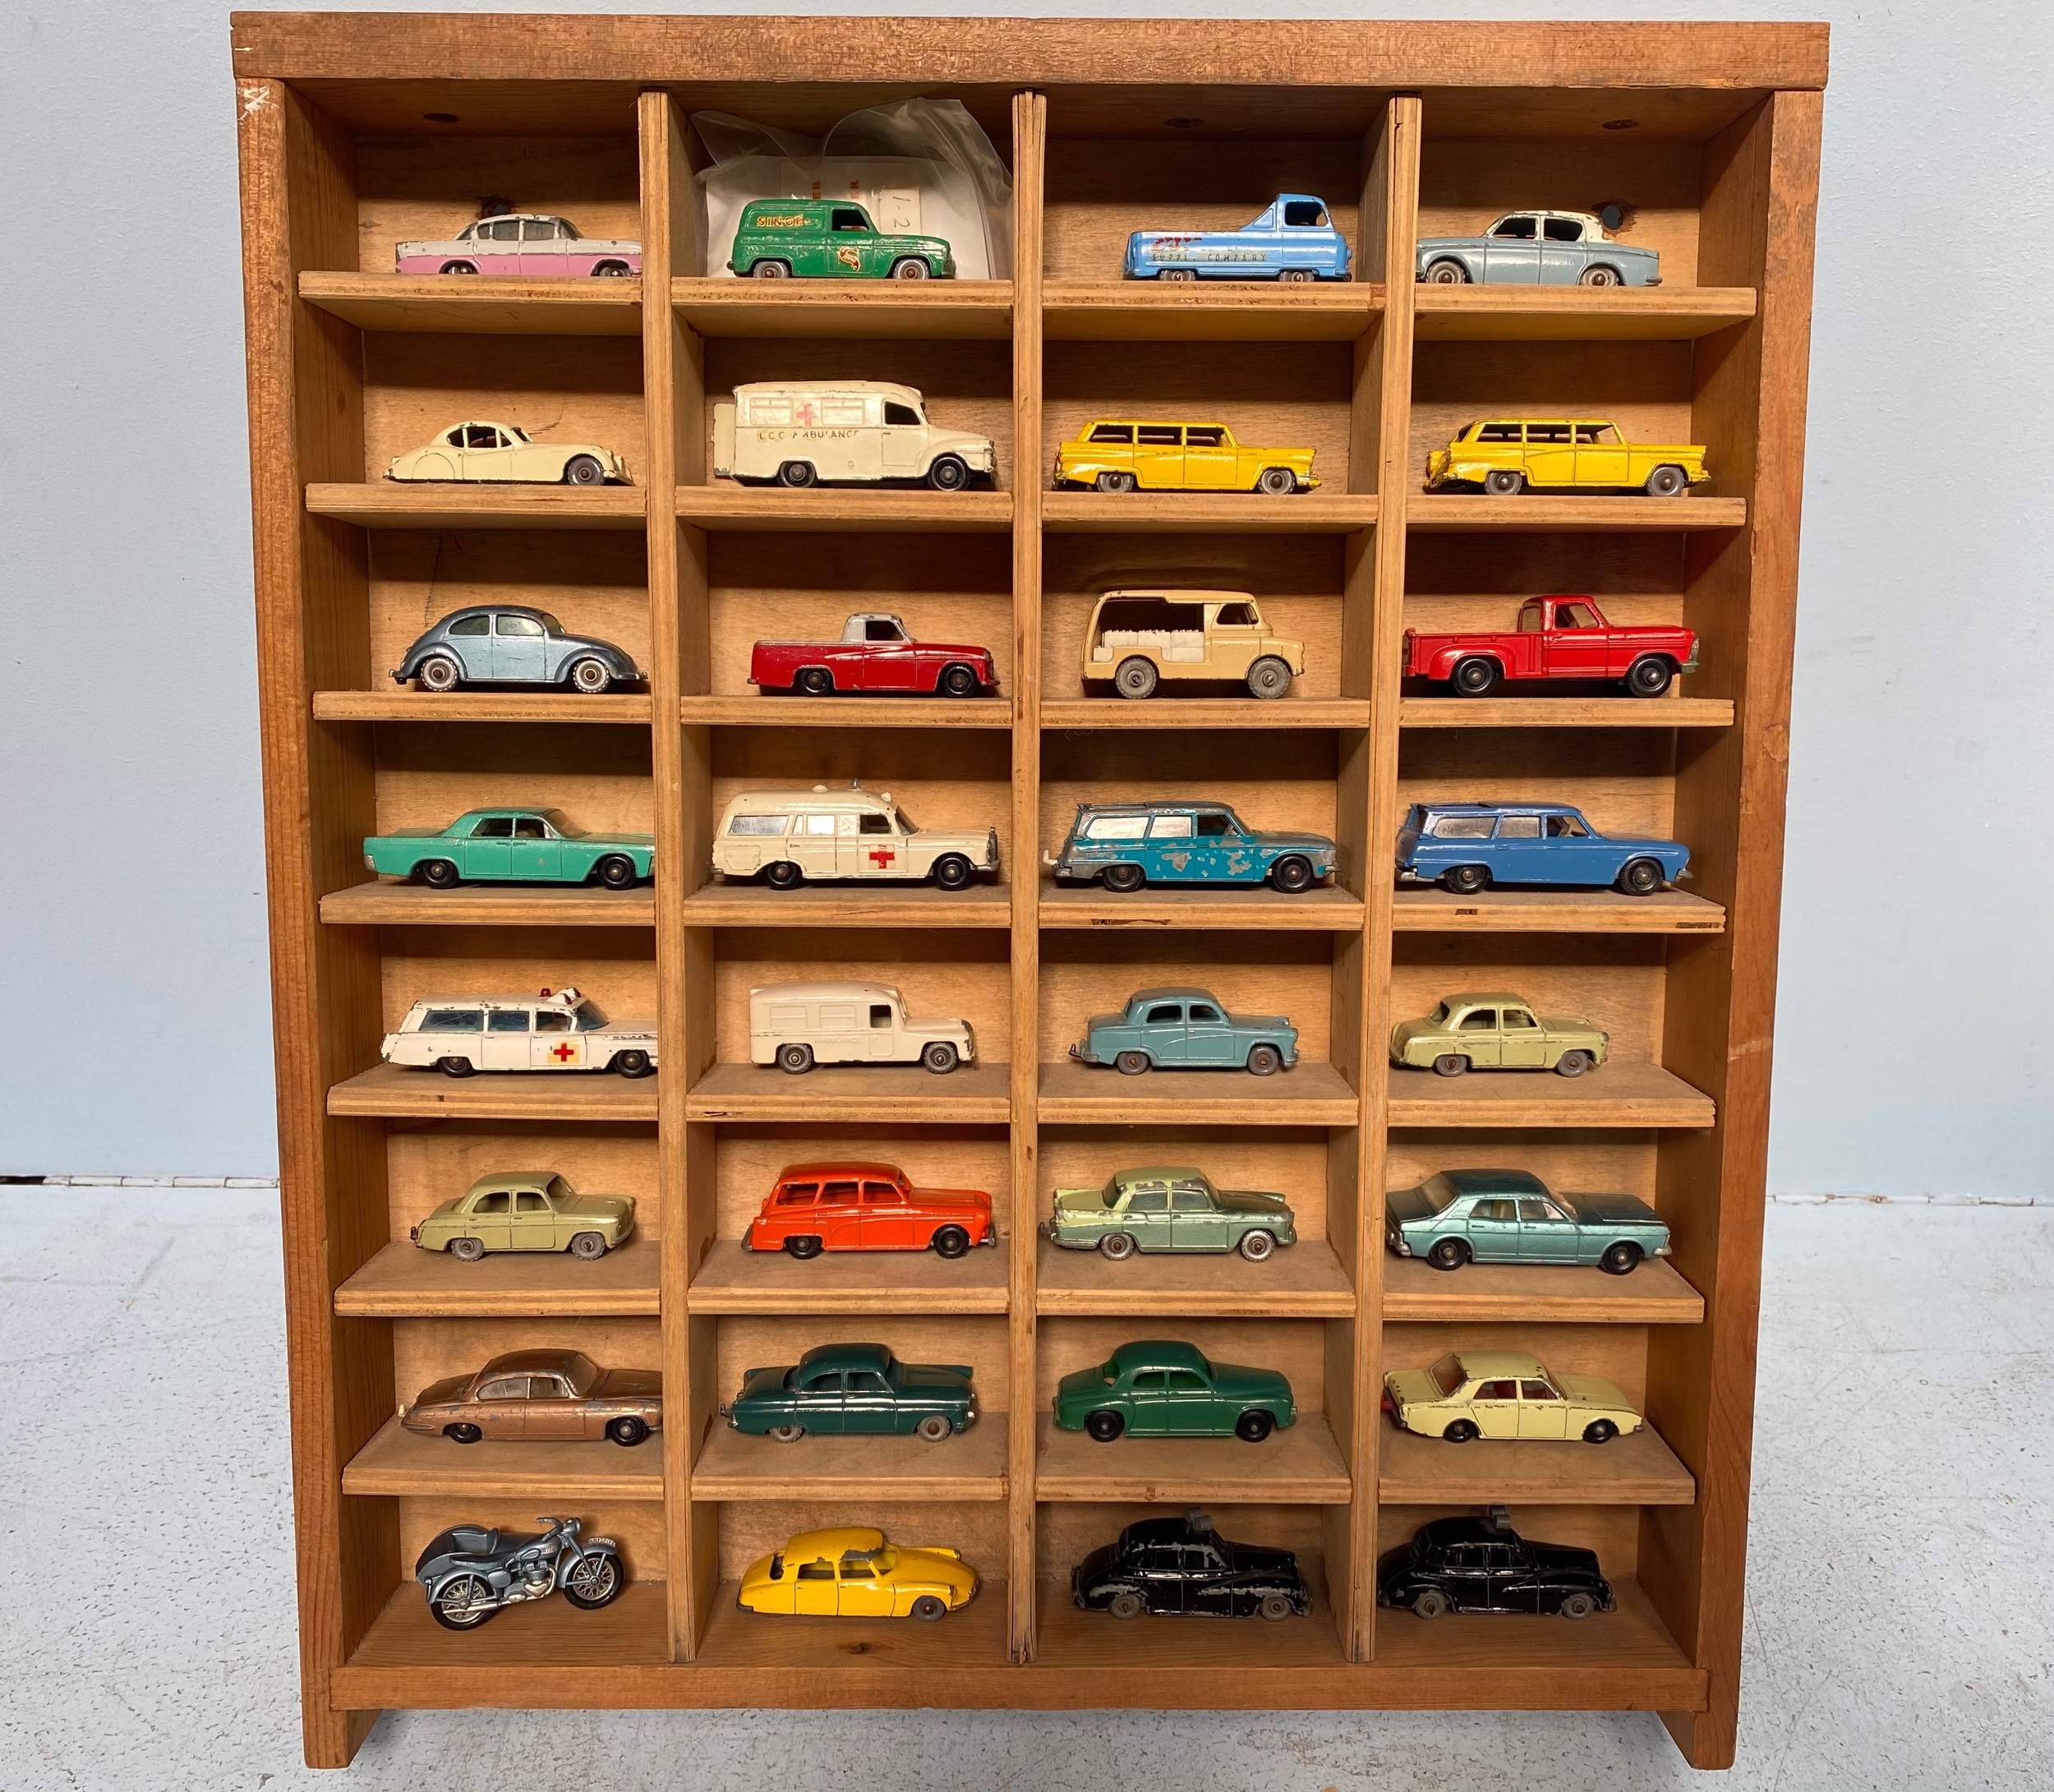 A collection of 32 loose play worn die-cast model vehicles, housed in wooden display case,